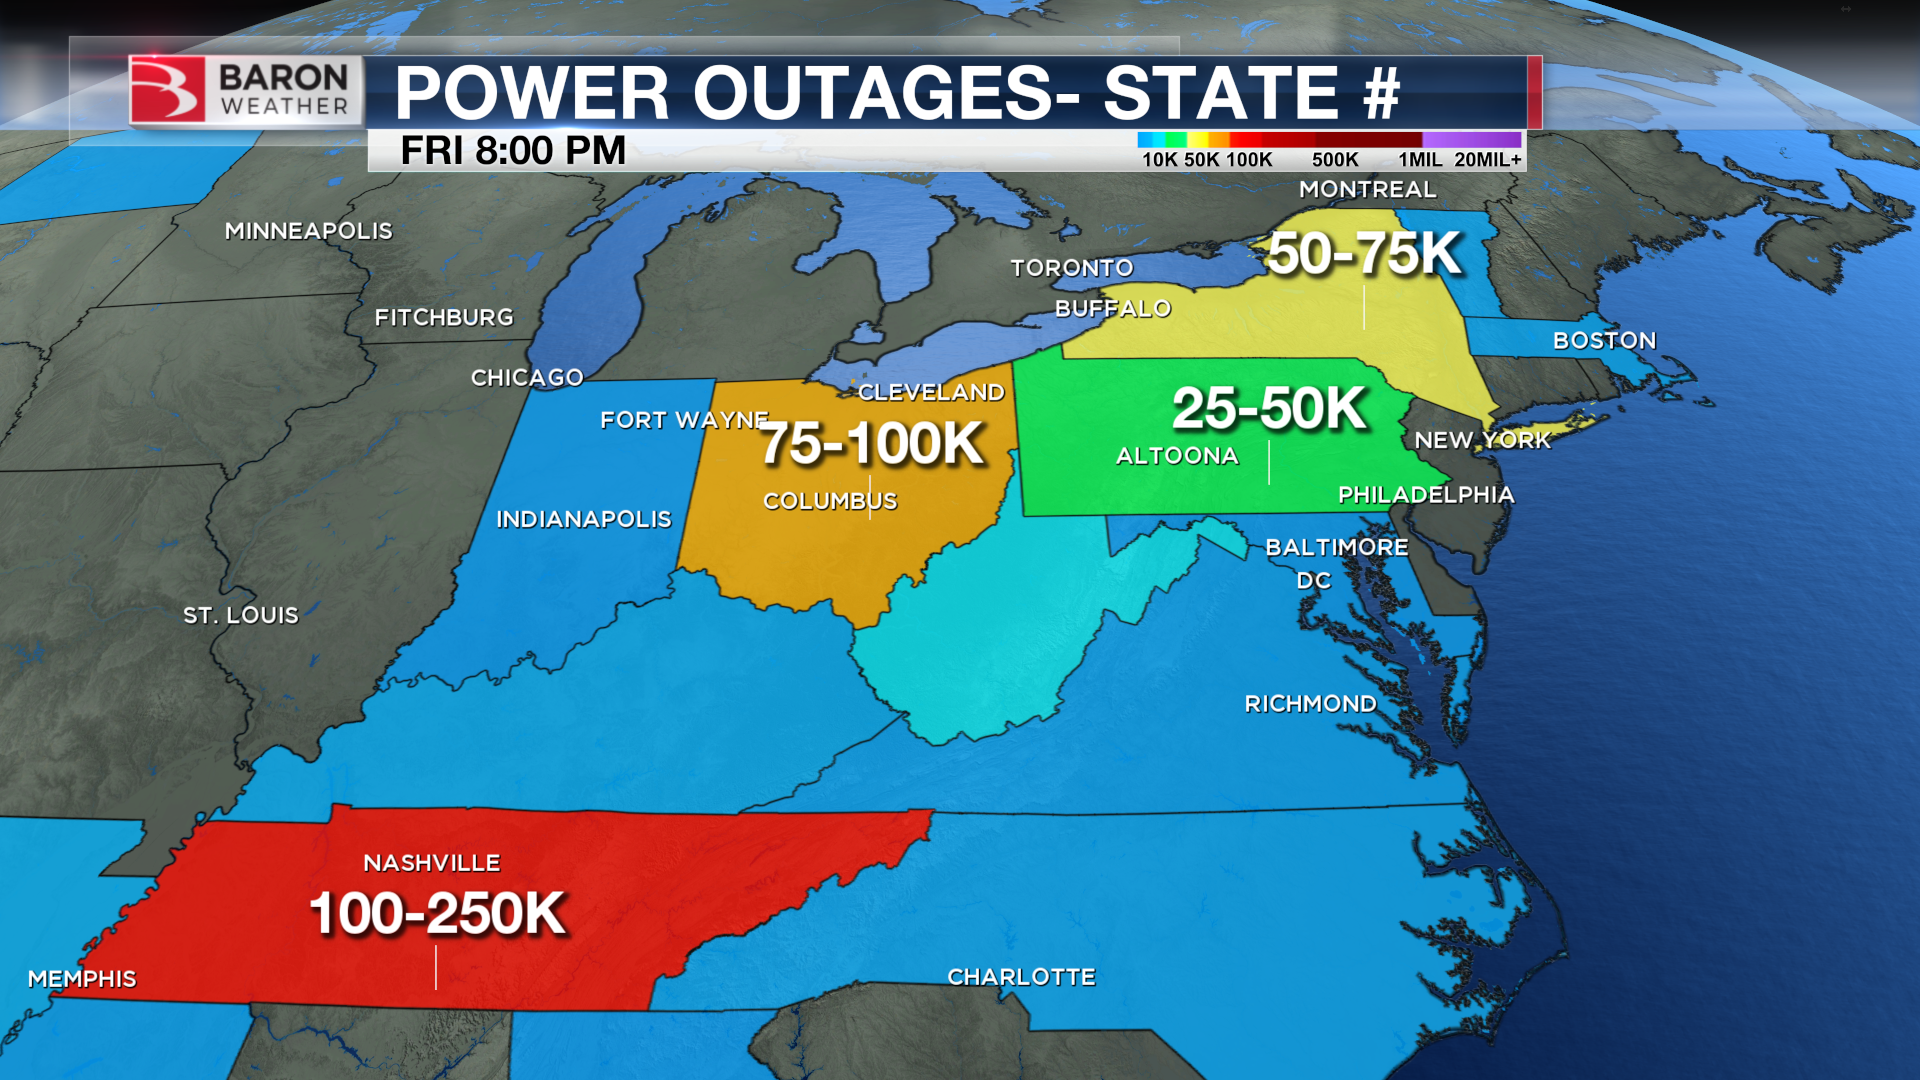 Power-Out-State-Number